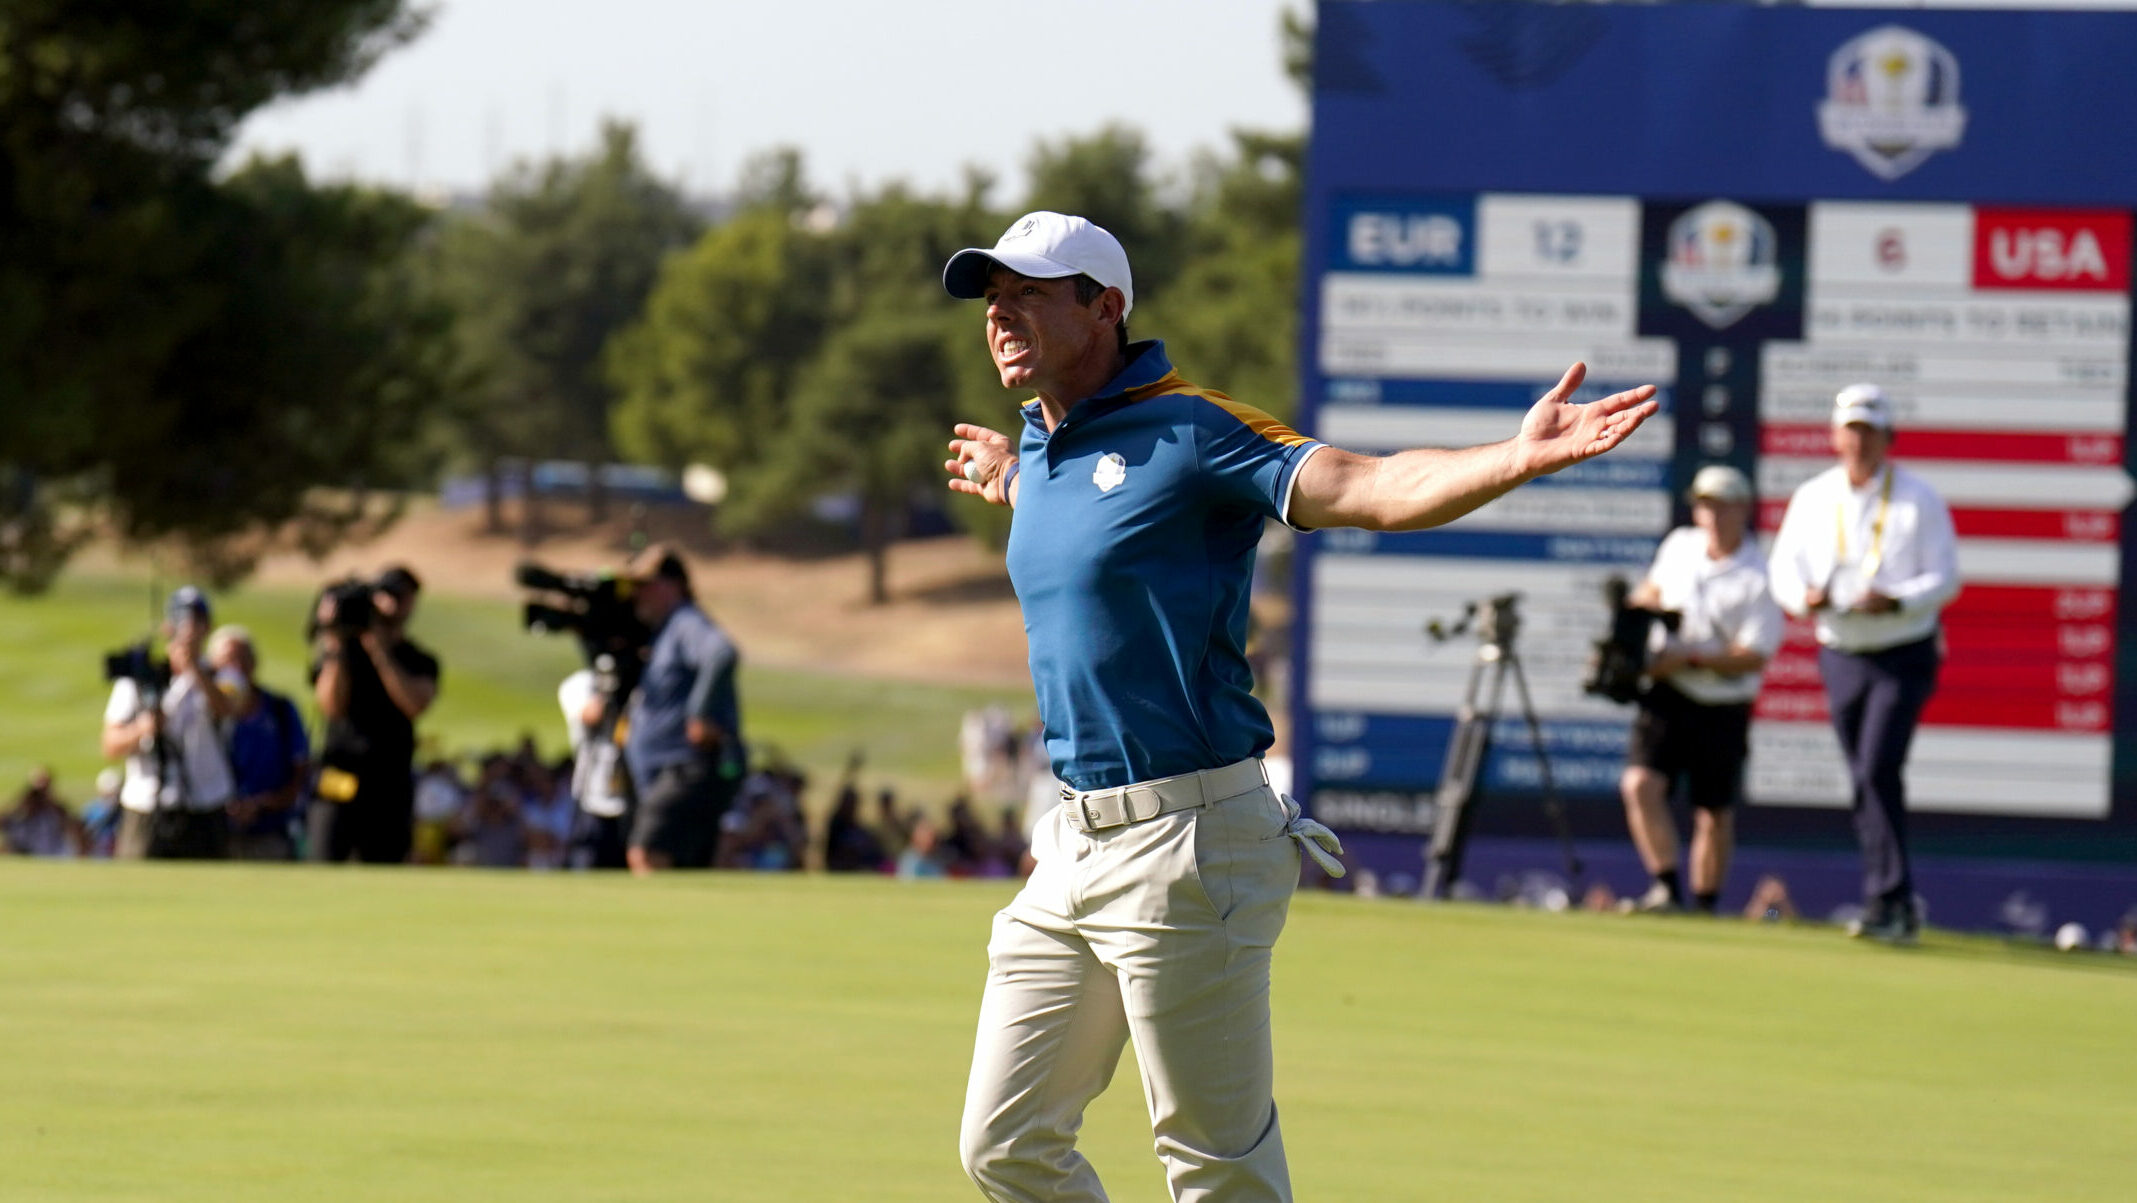 Rory McIlroy celebrates after holing his putt on the 15th hole